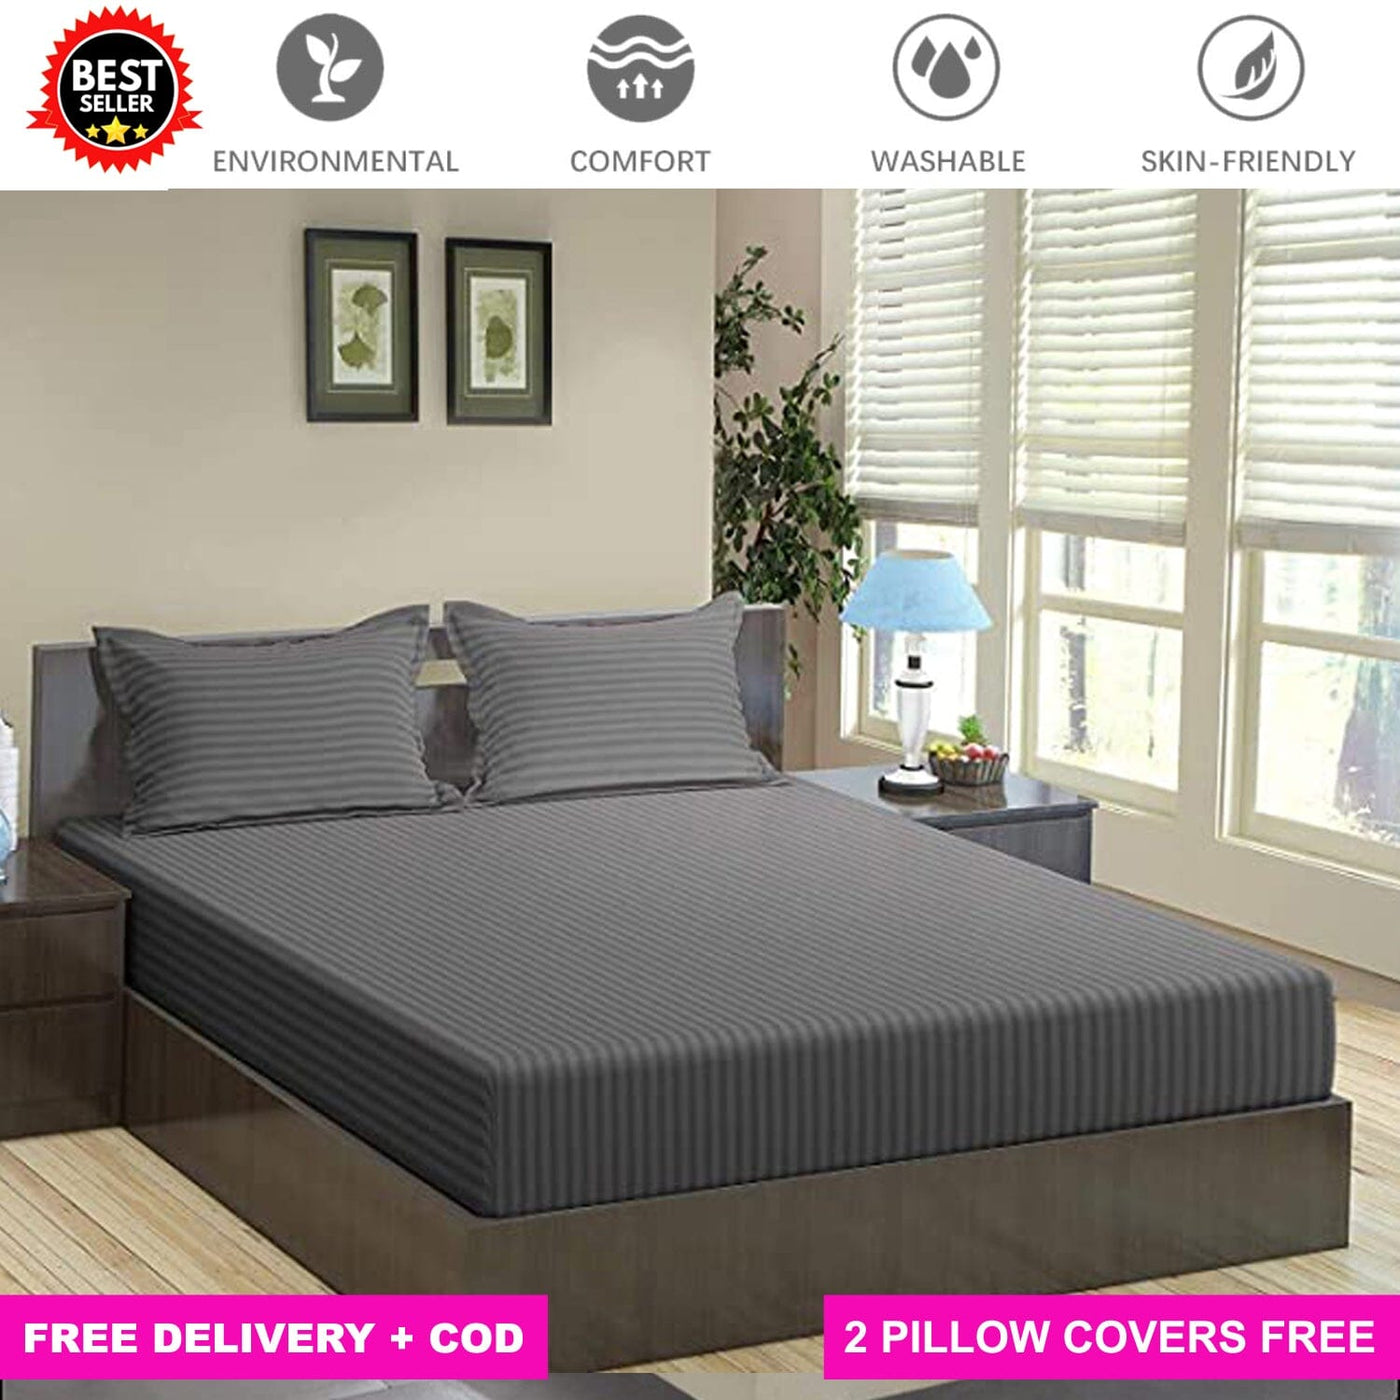 Dark Grey Full Elastic Fitted Bedsheet with 2 Pillow Covers Bed Sheets Great Happy IN KING SIZE - ₹1299 